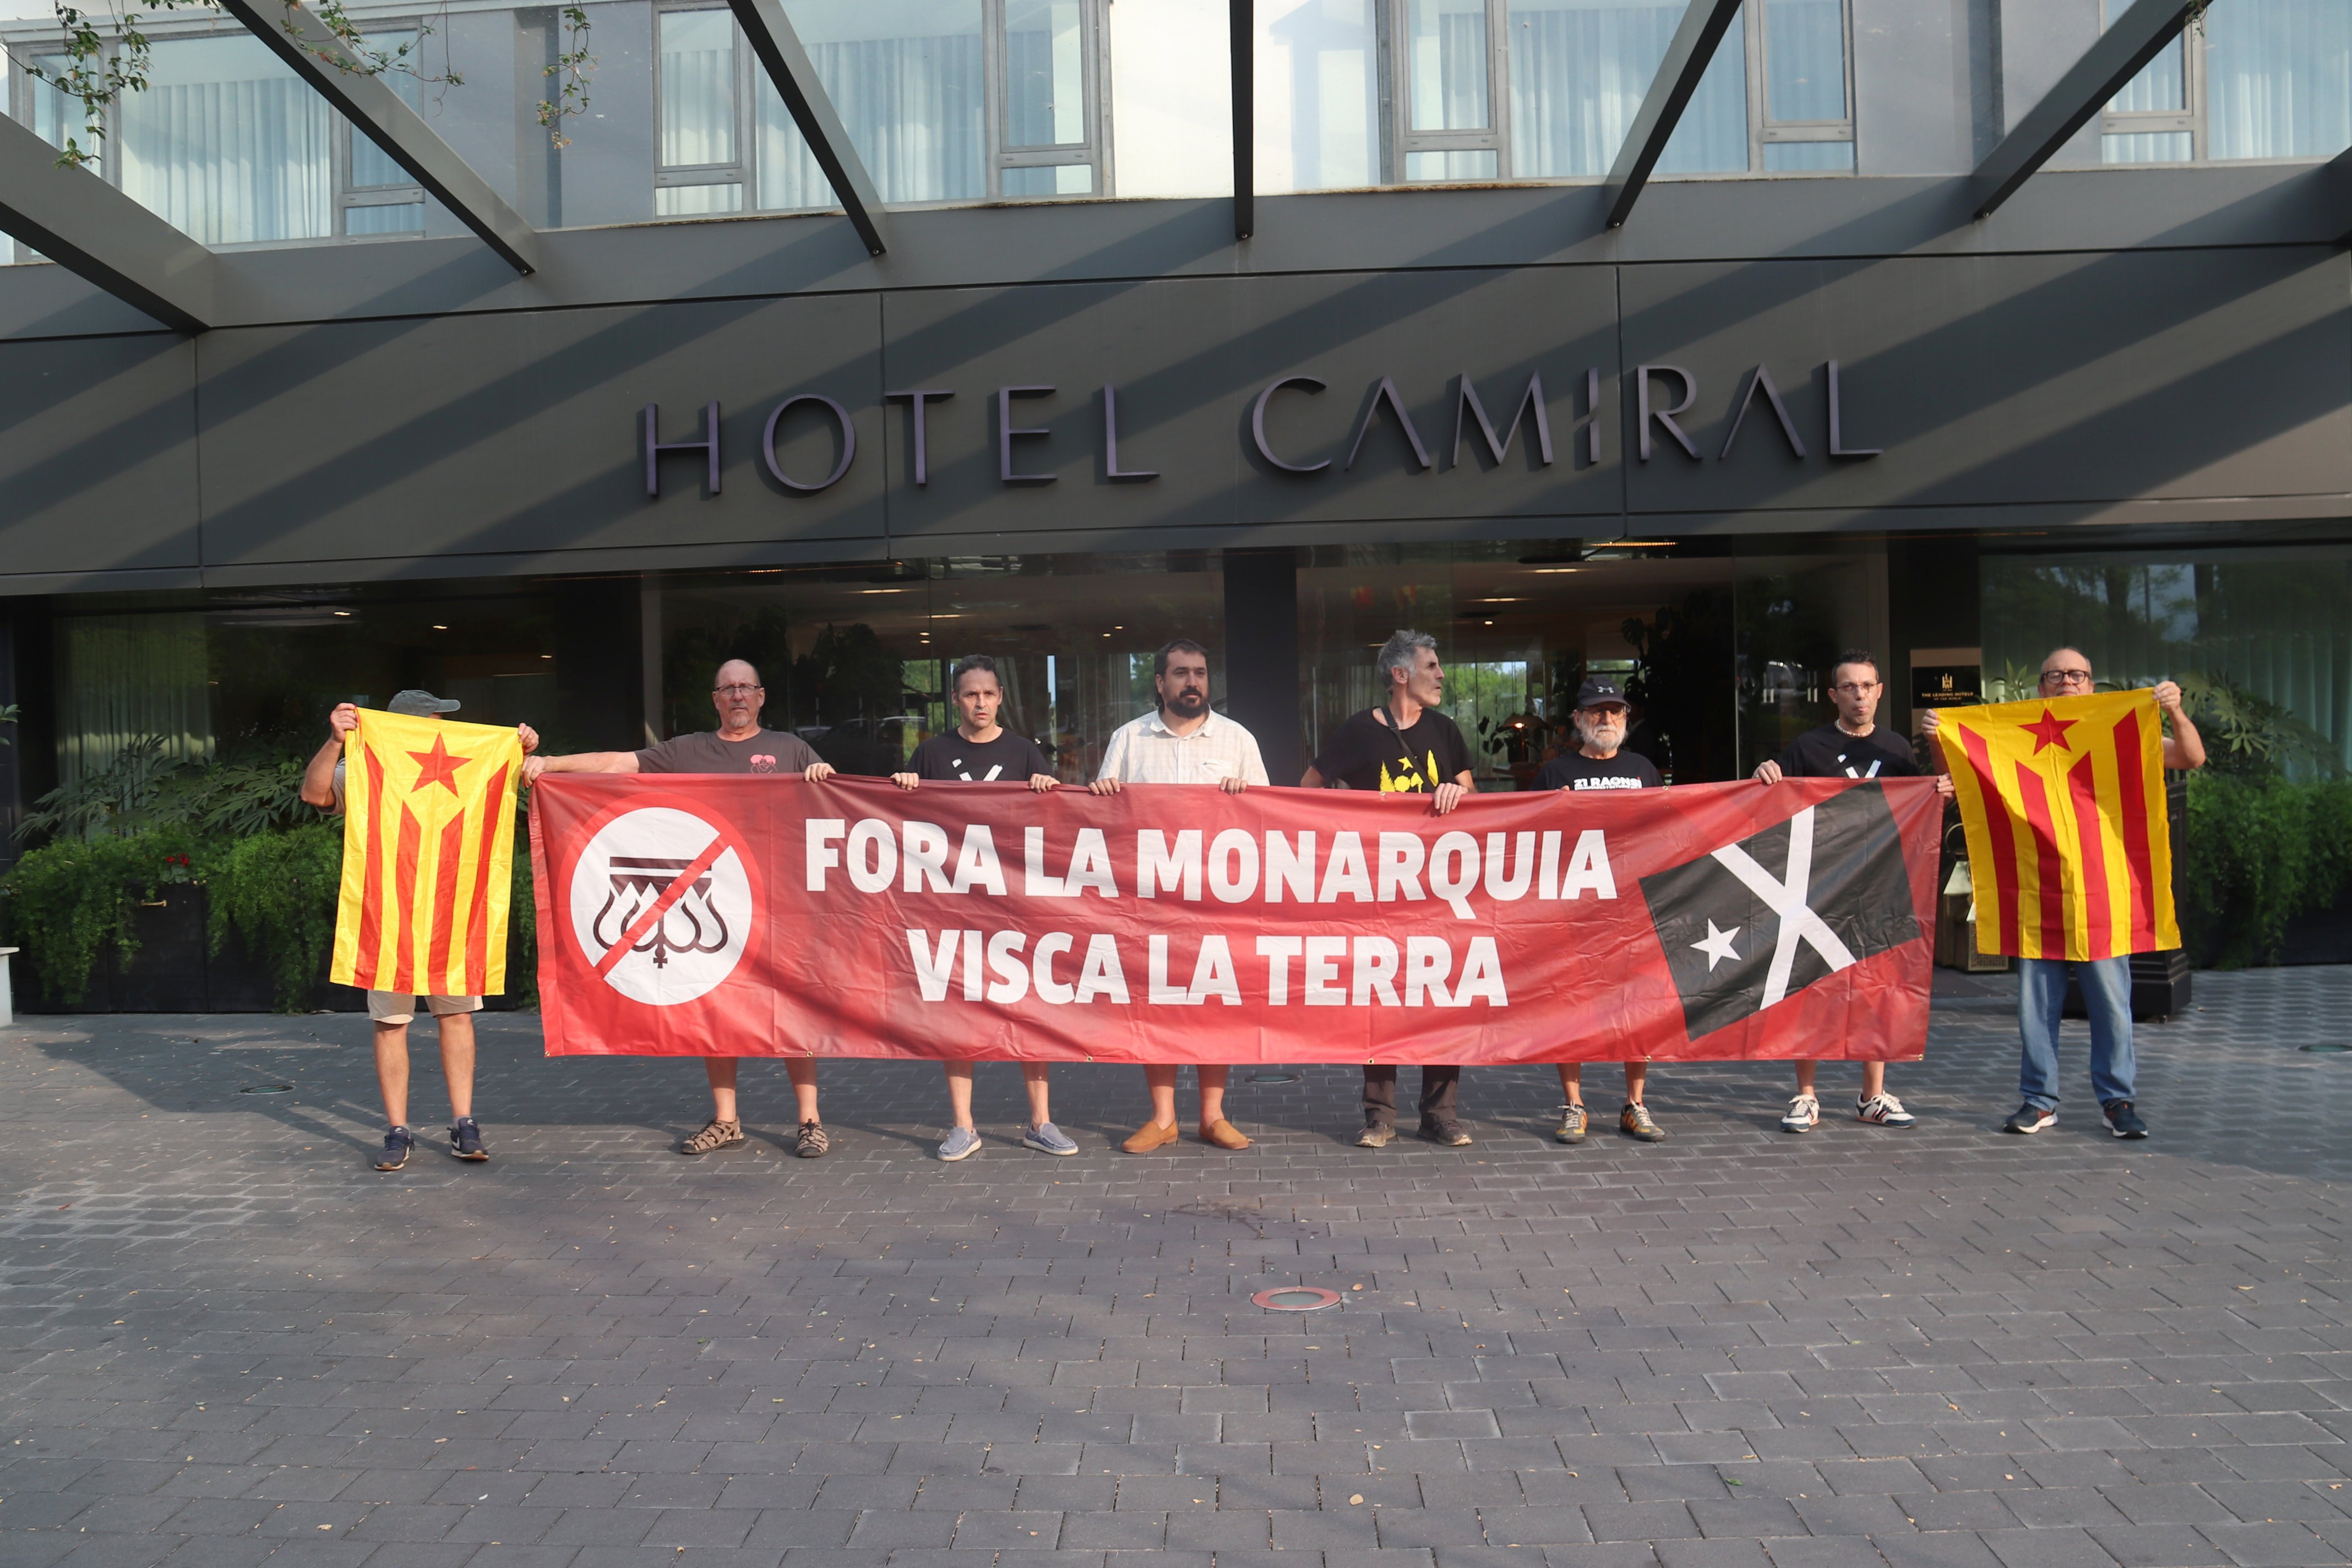 First protest over presence of the Spanish royal family in Caldes de Malavella